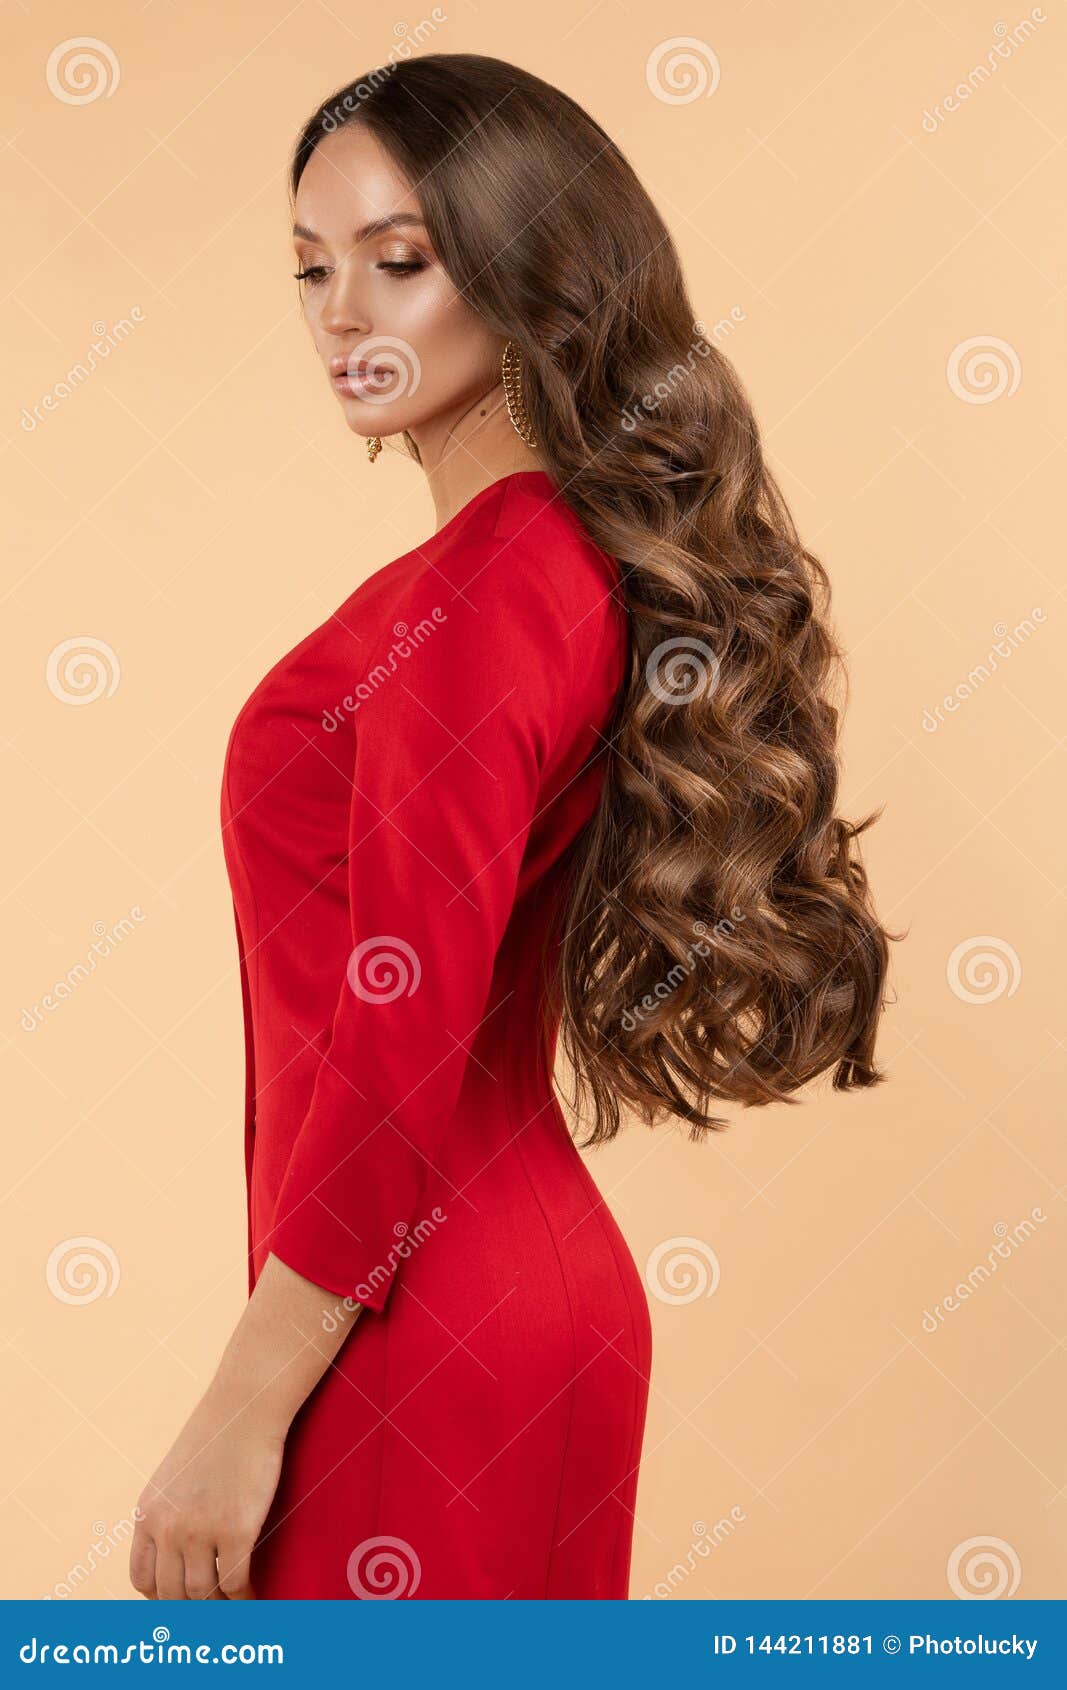 https://thumbs.dreamstime.com/z/elegant-woman-beautiful-long-hair-red-dress-posing-side-view-gorgeous-young-wearing-background-studio-female-144211881.jpg